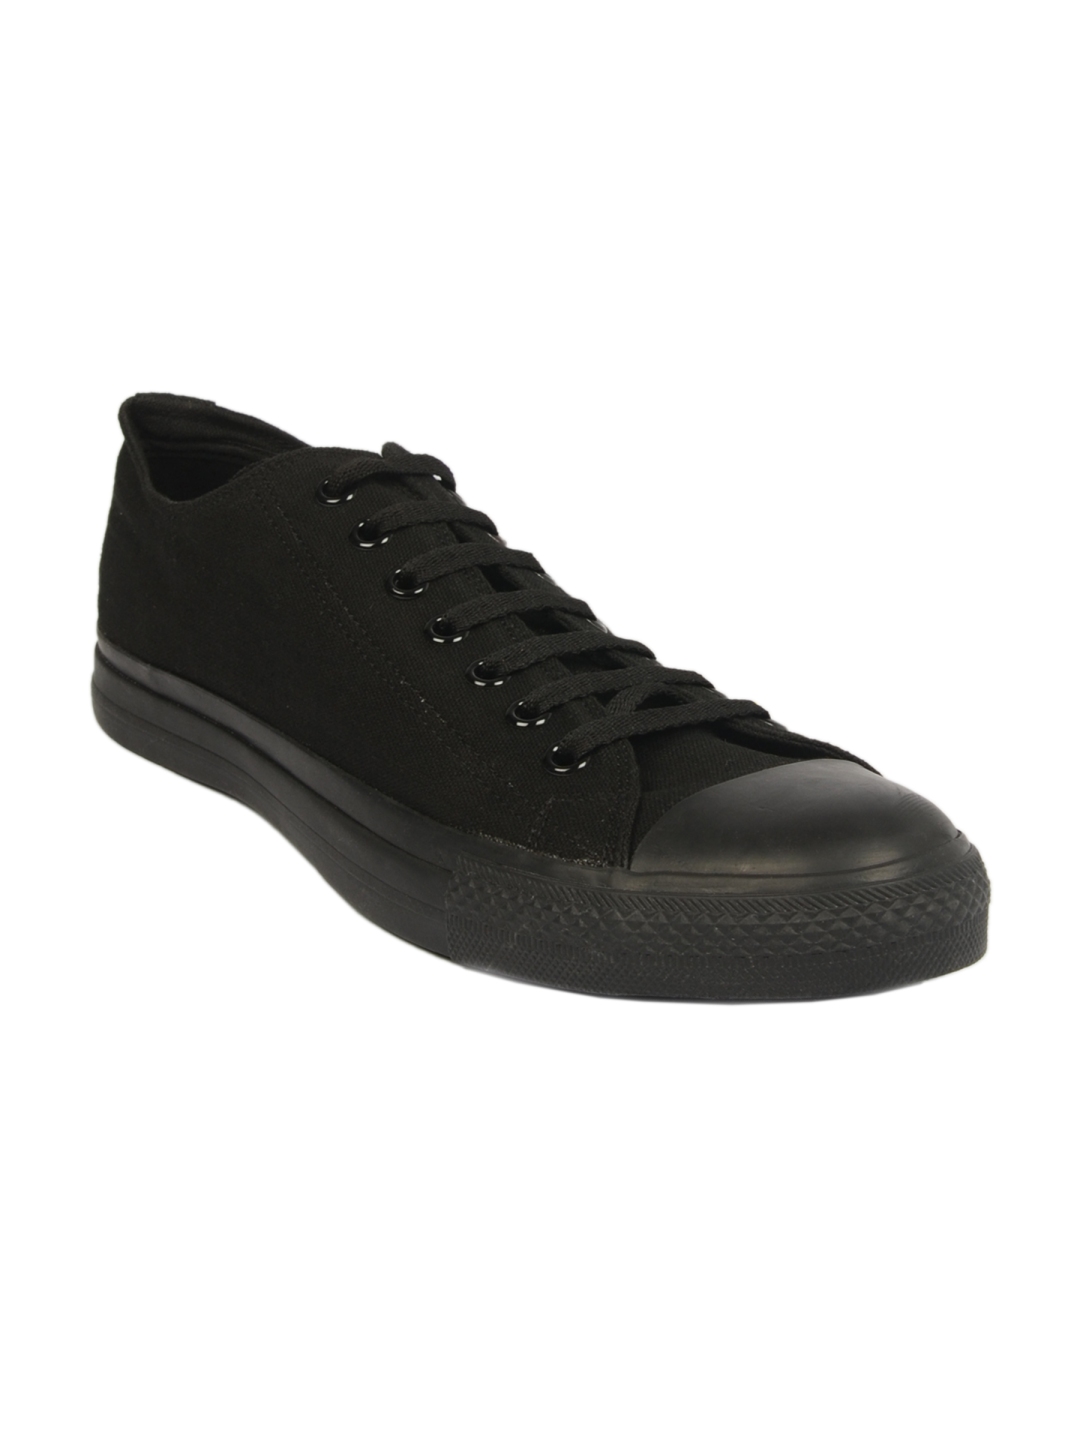 Buy Converse Unisex Mono Black Canvas - Casual Shoes for Unisex 8247 |  Myntra